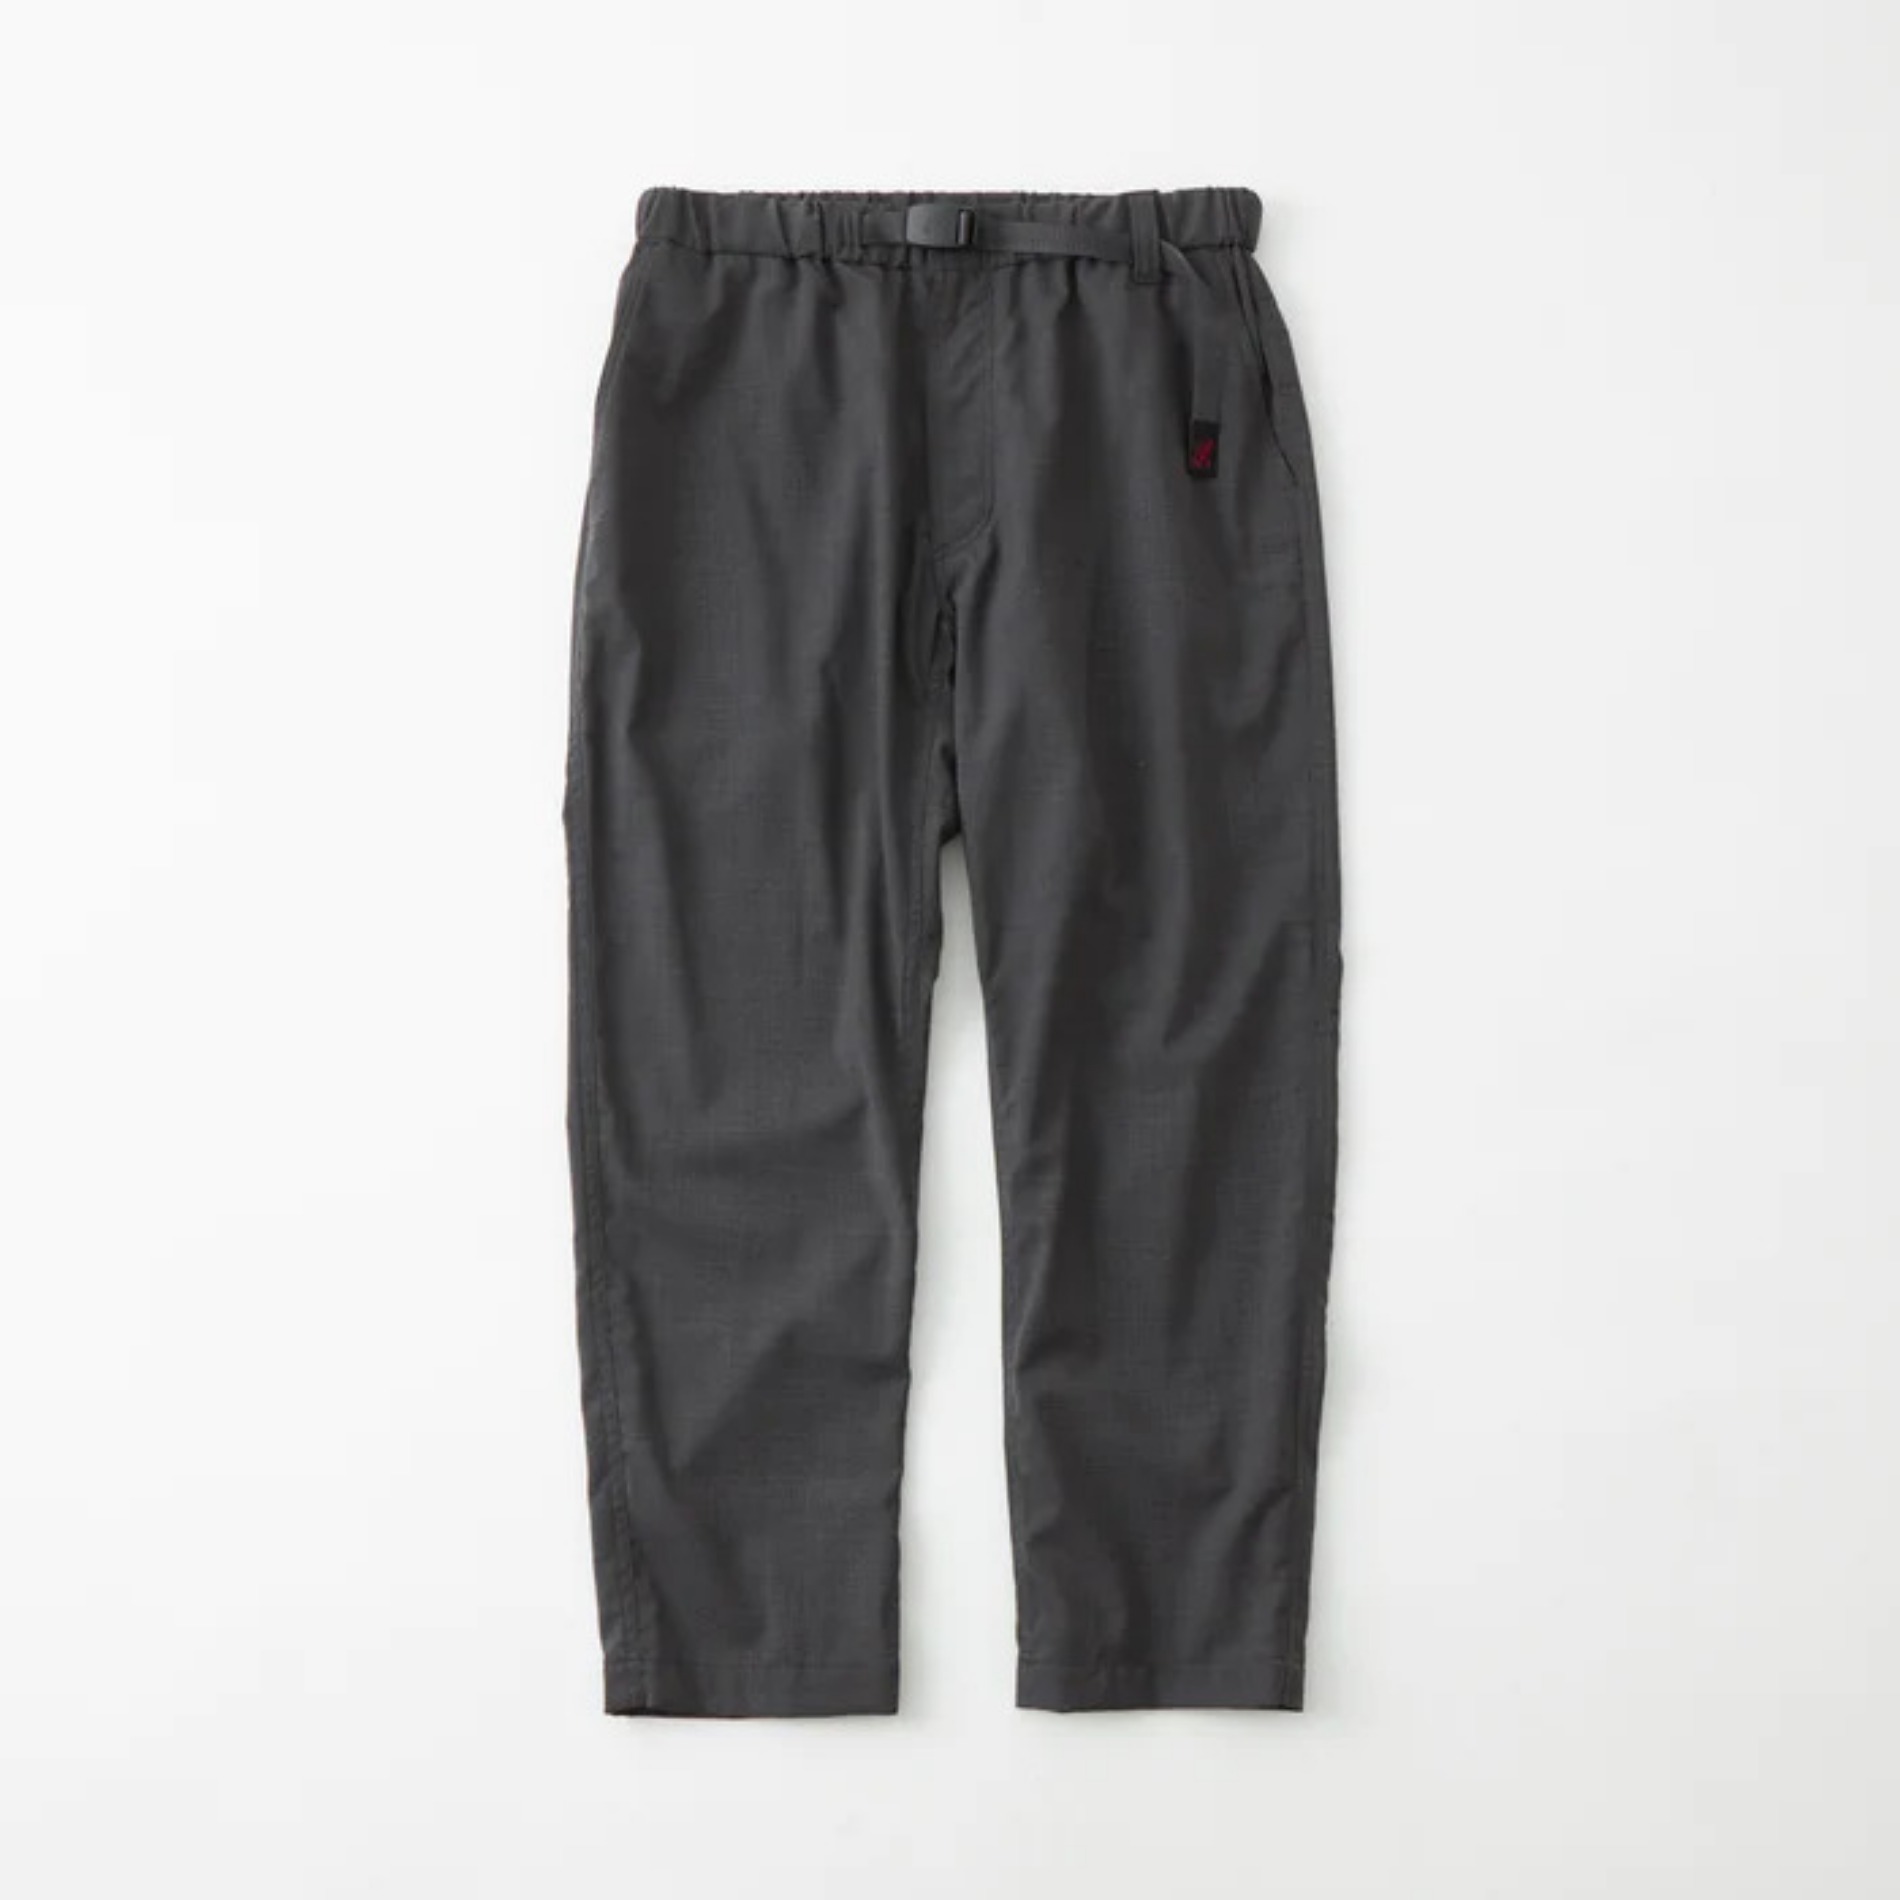 AW22 WHITE MOUNTAINEERING X GRAMICCI TECH WOOLLY TAPERED PANTS CHARCOAL